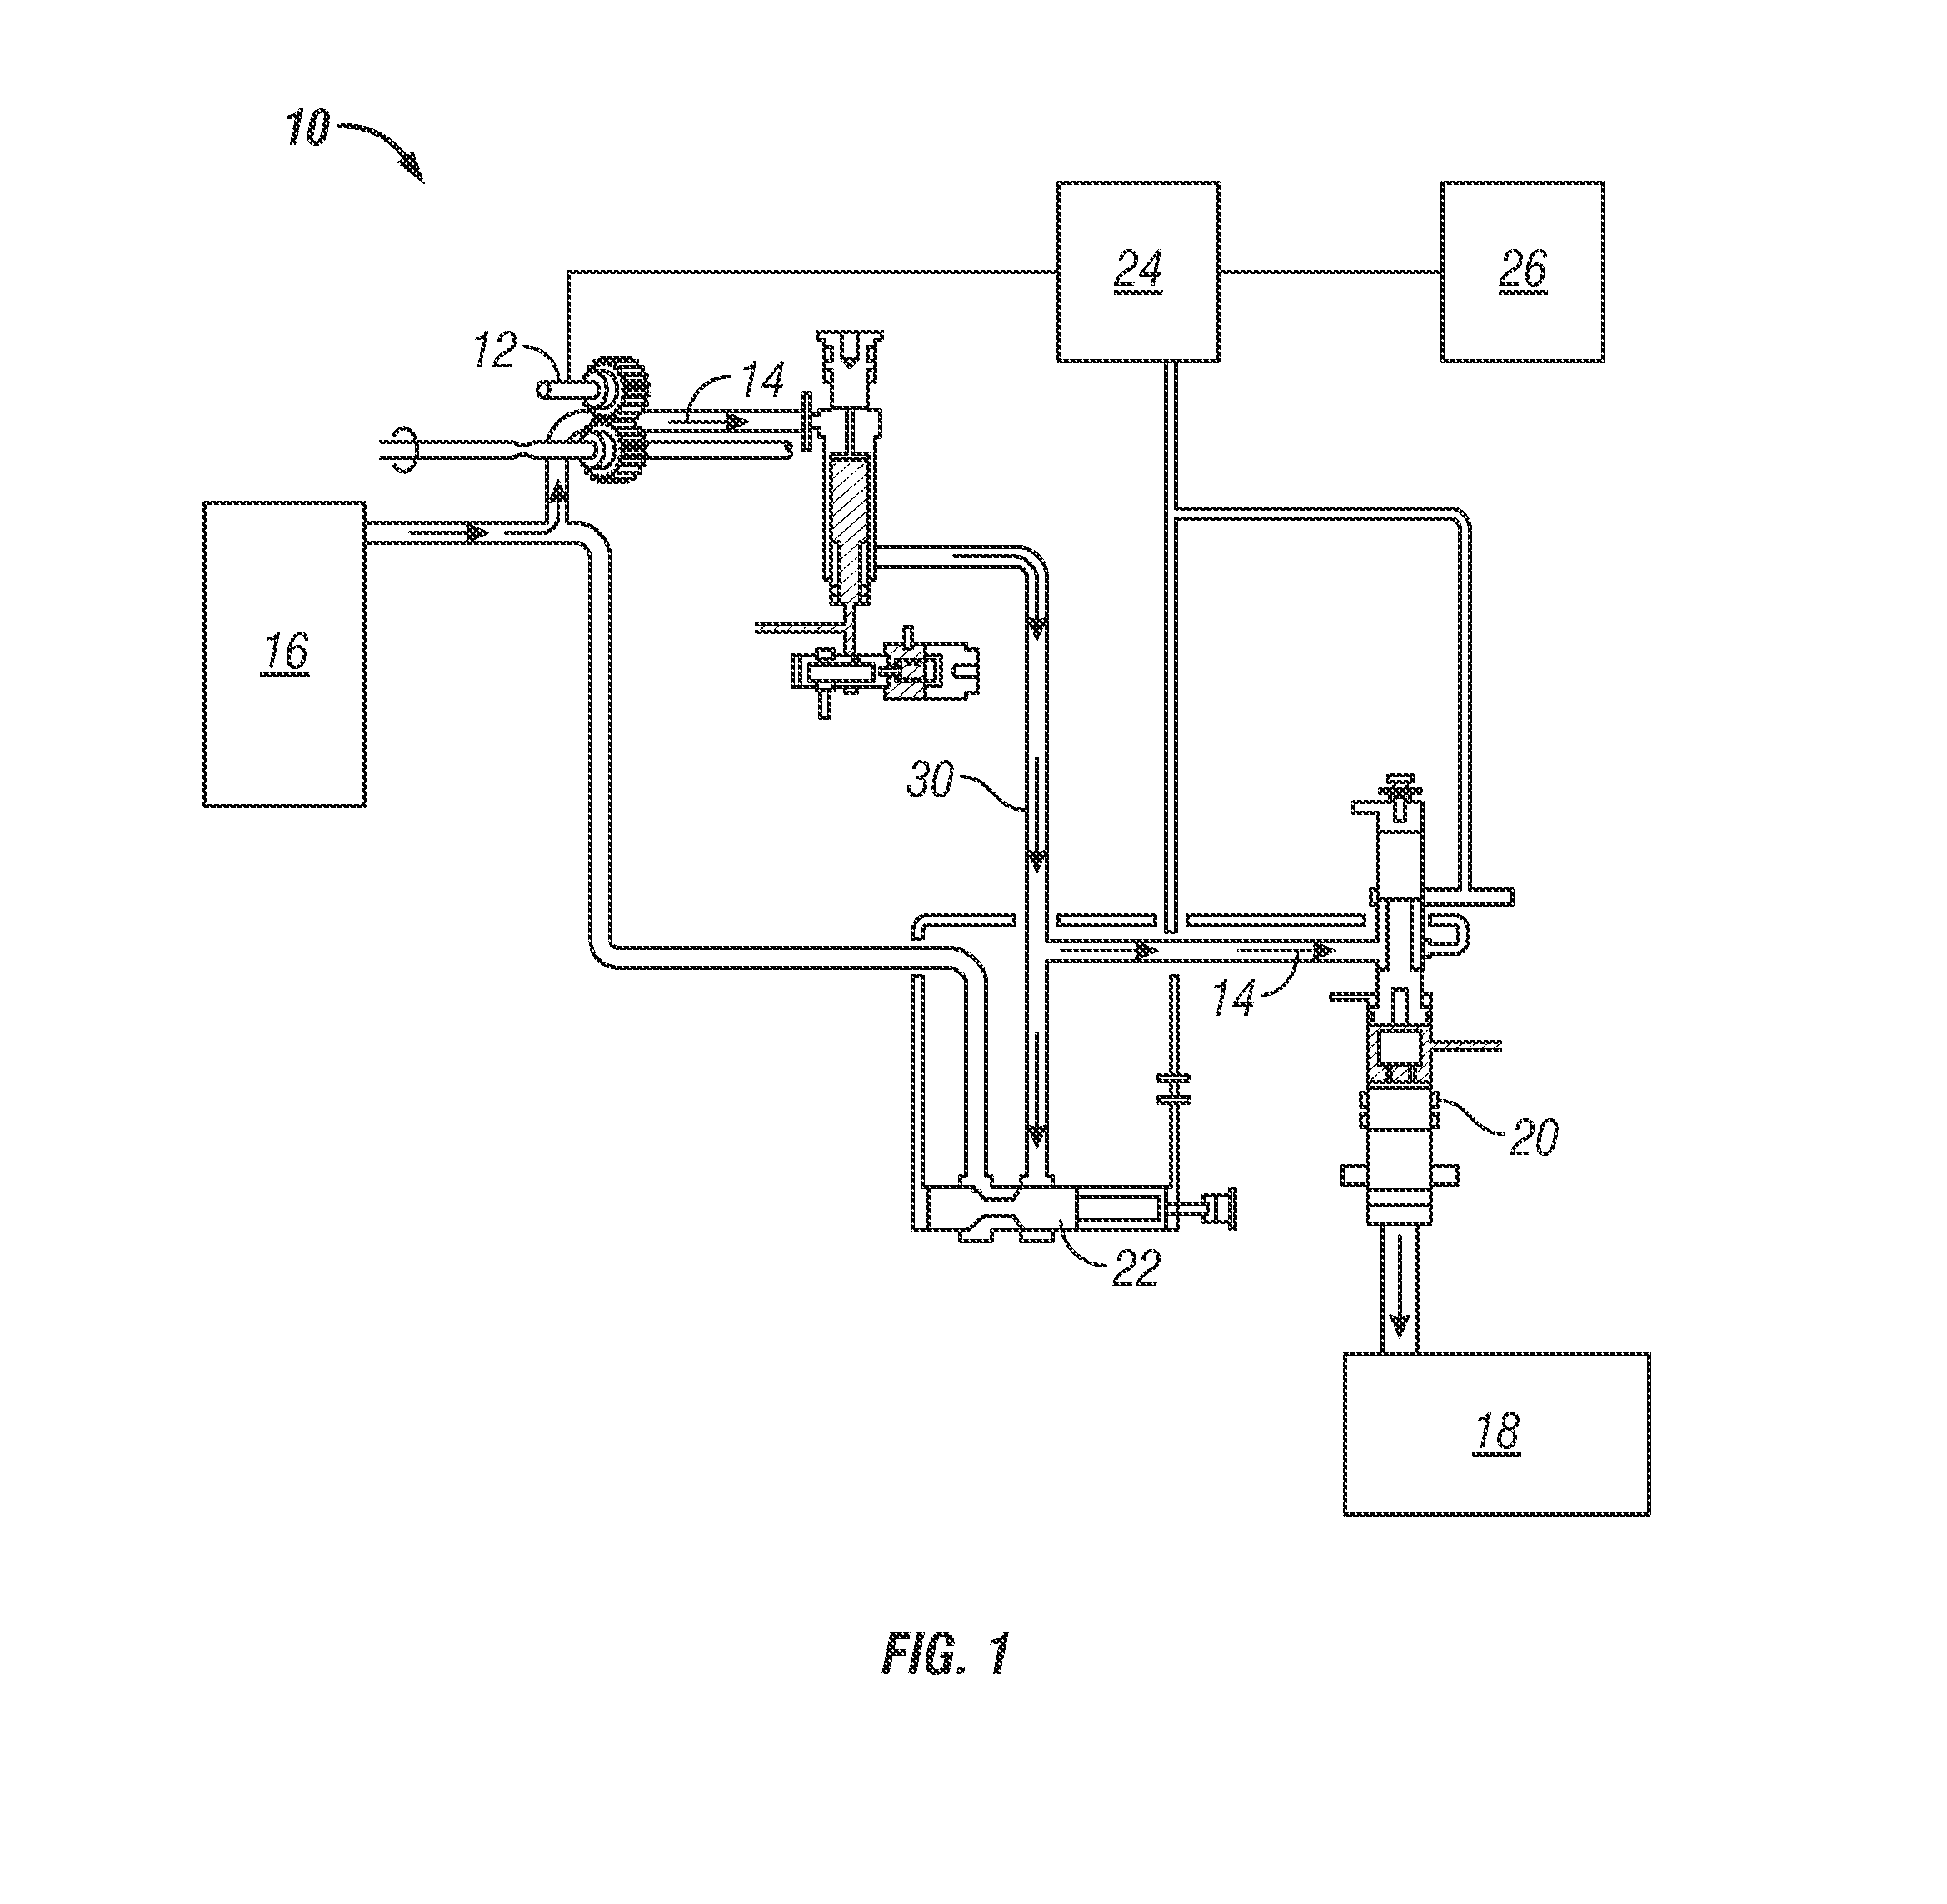 System and method for fuel system health monitoring